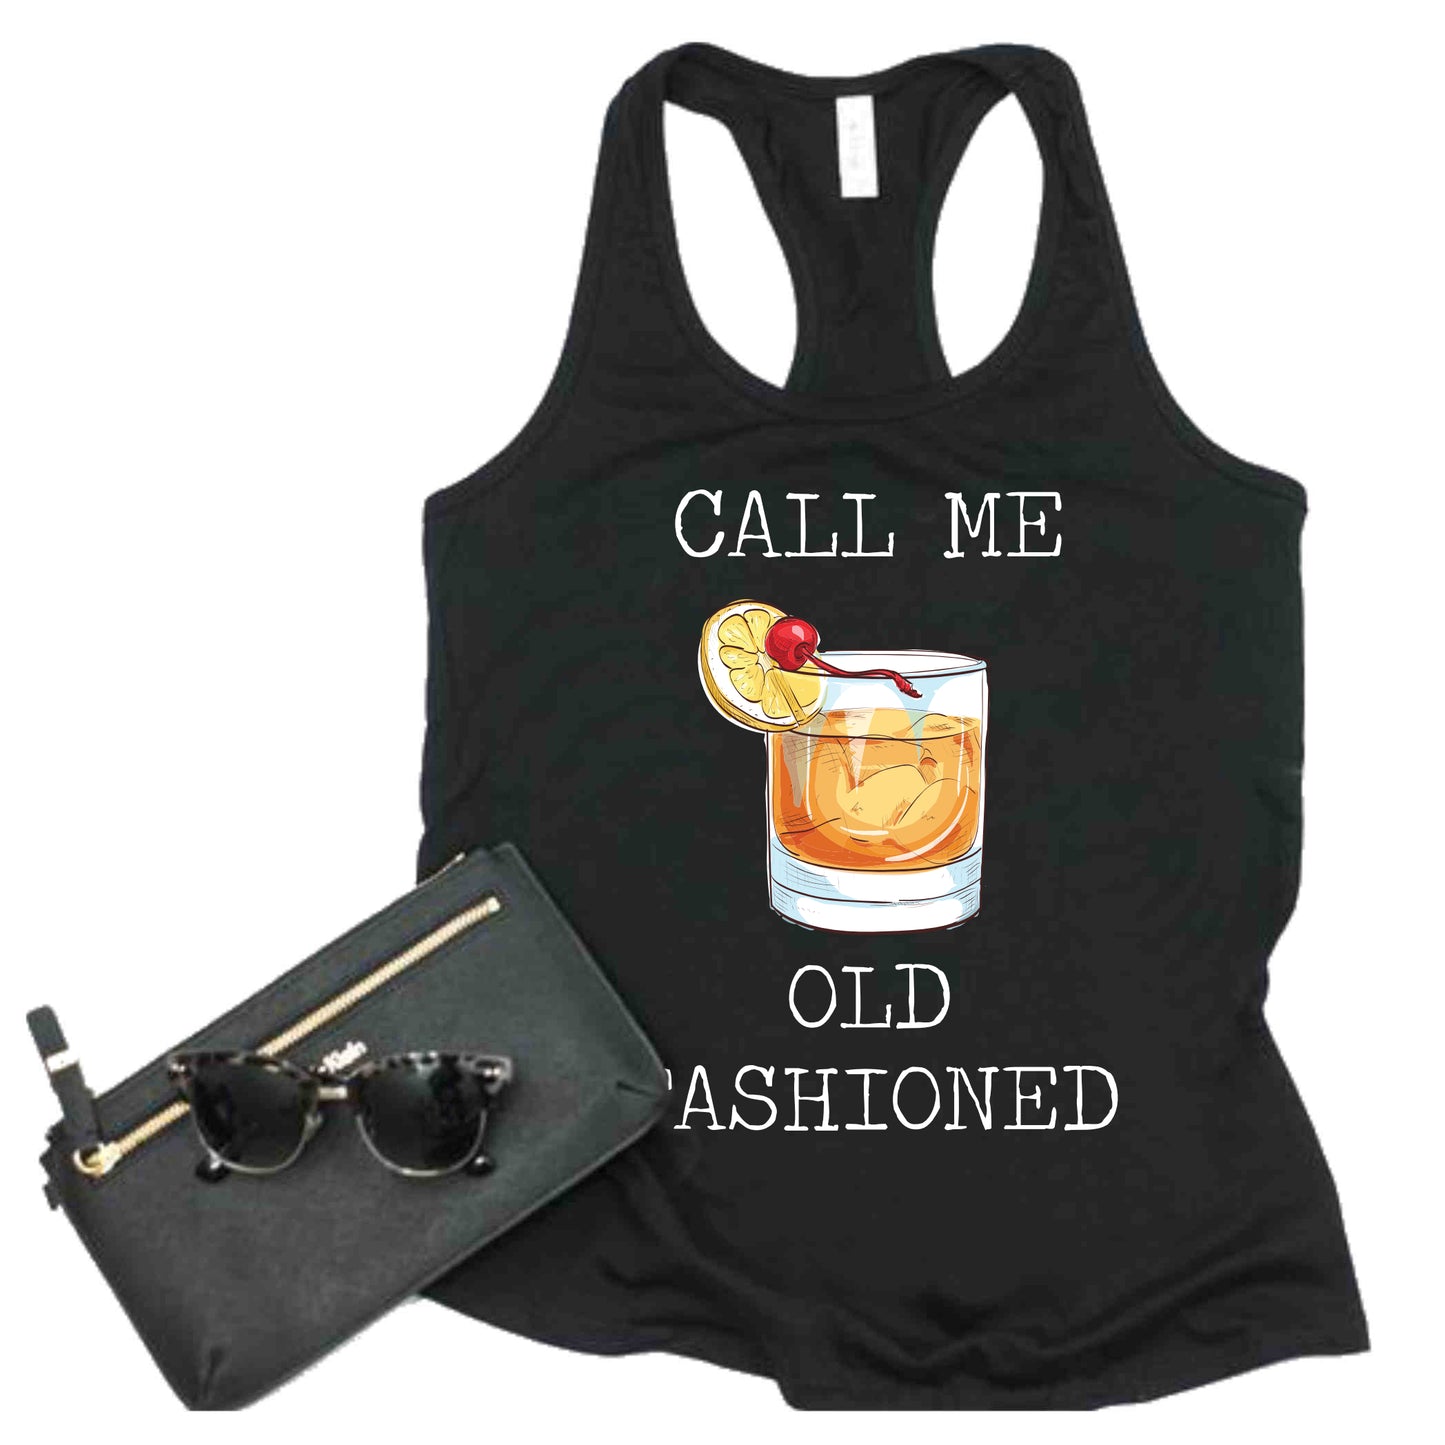 Be Old Fashioned this Summer  . . .